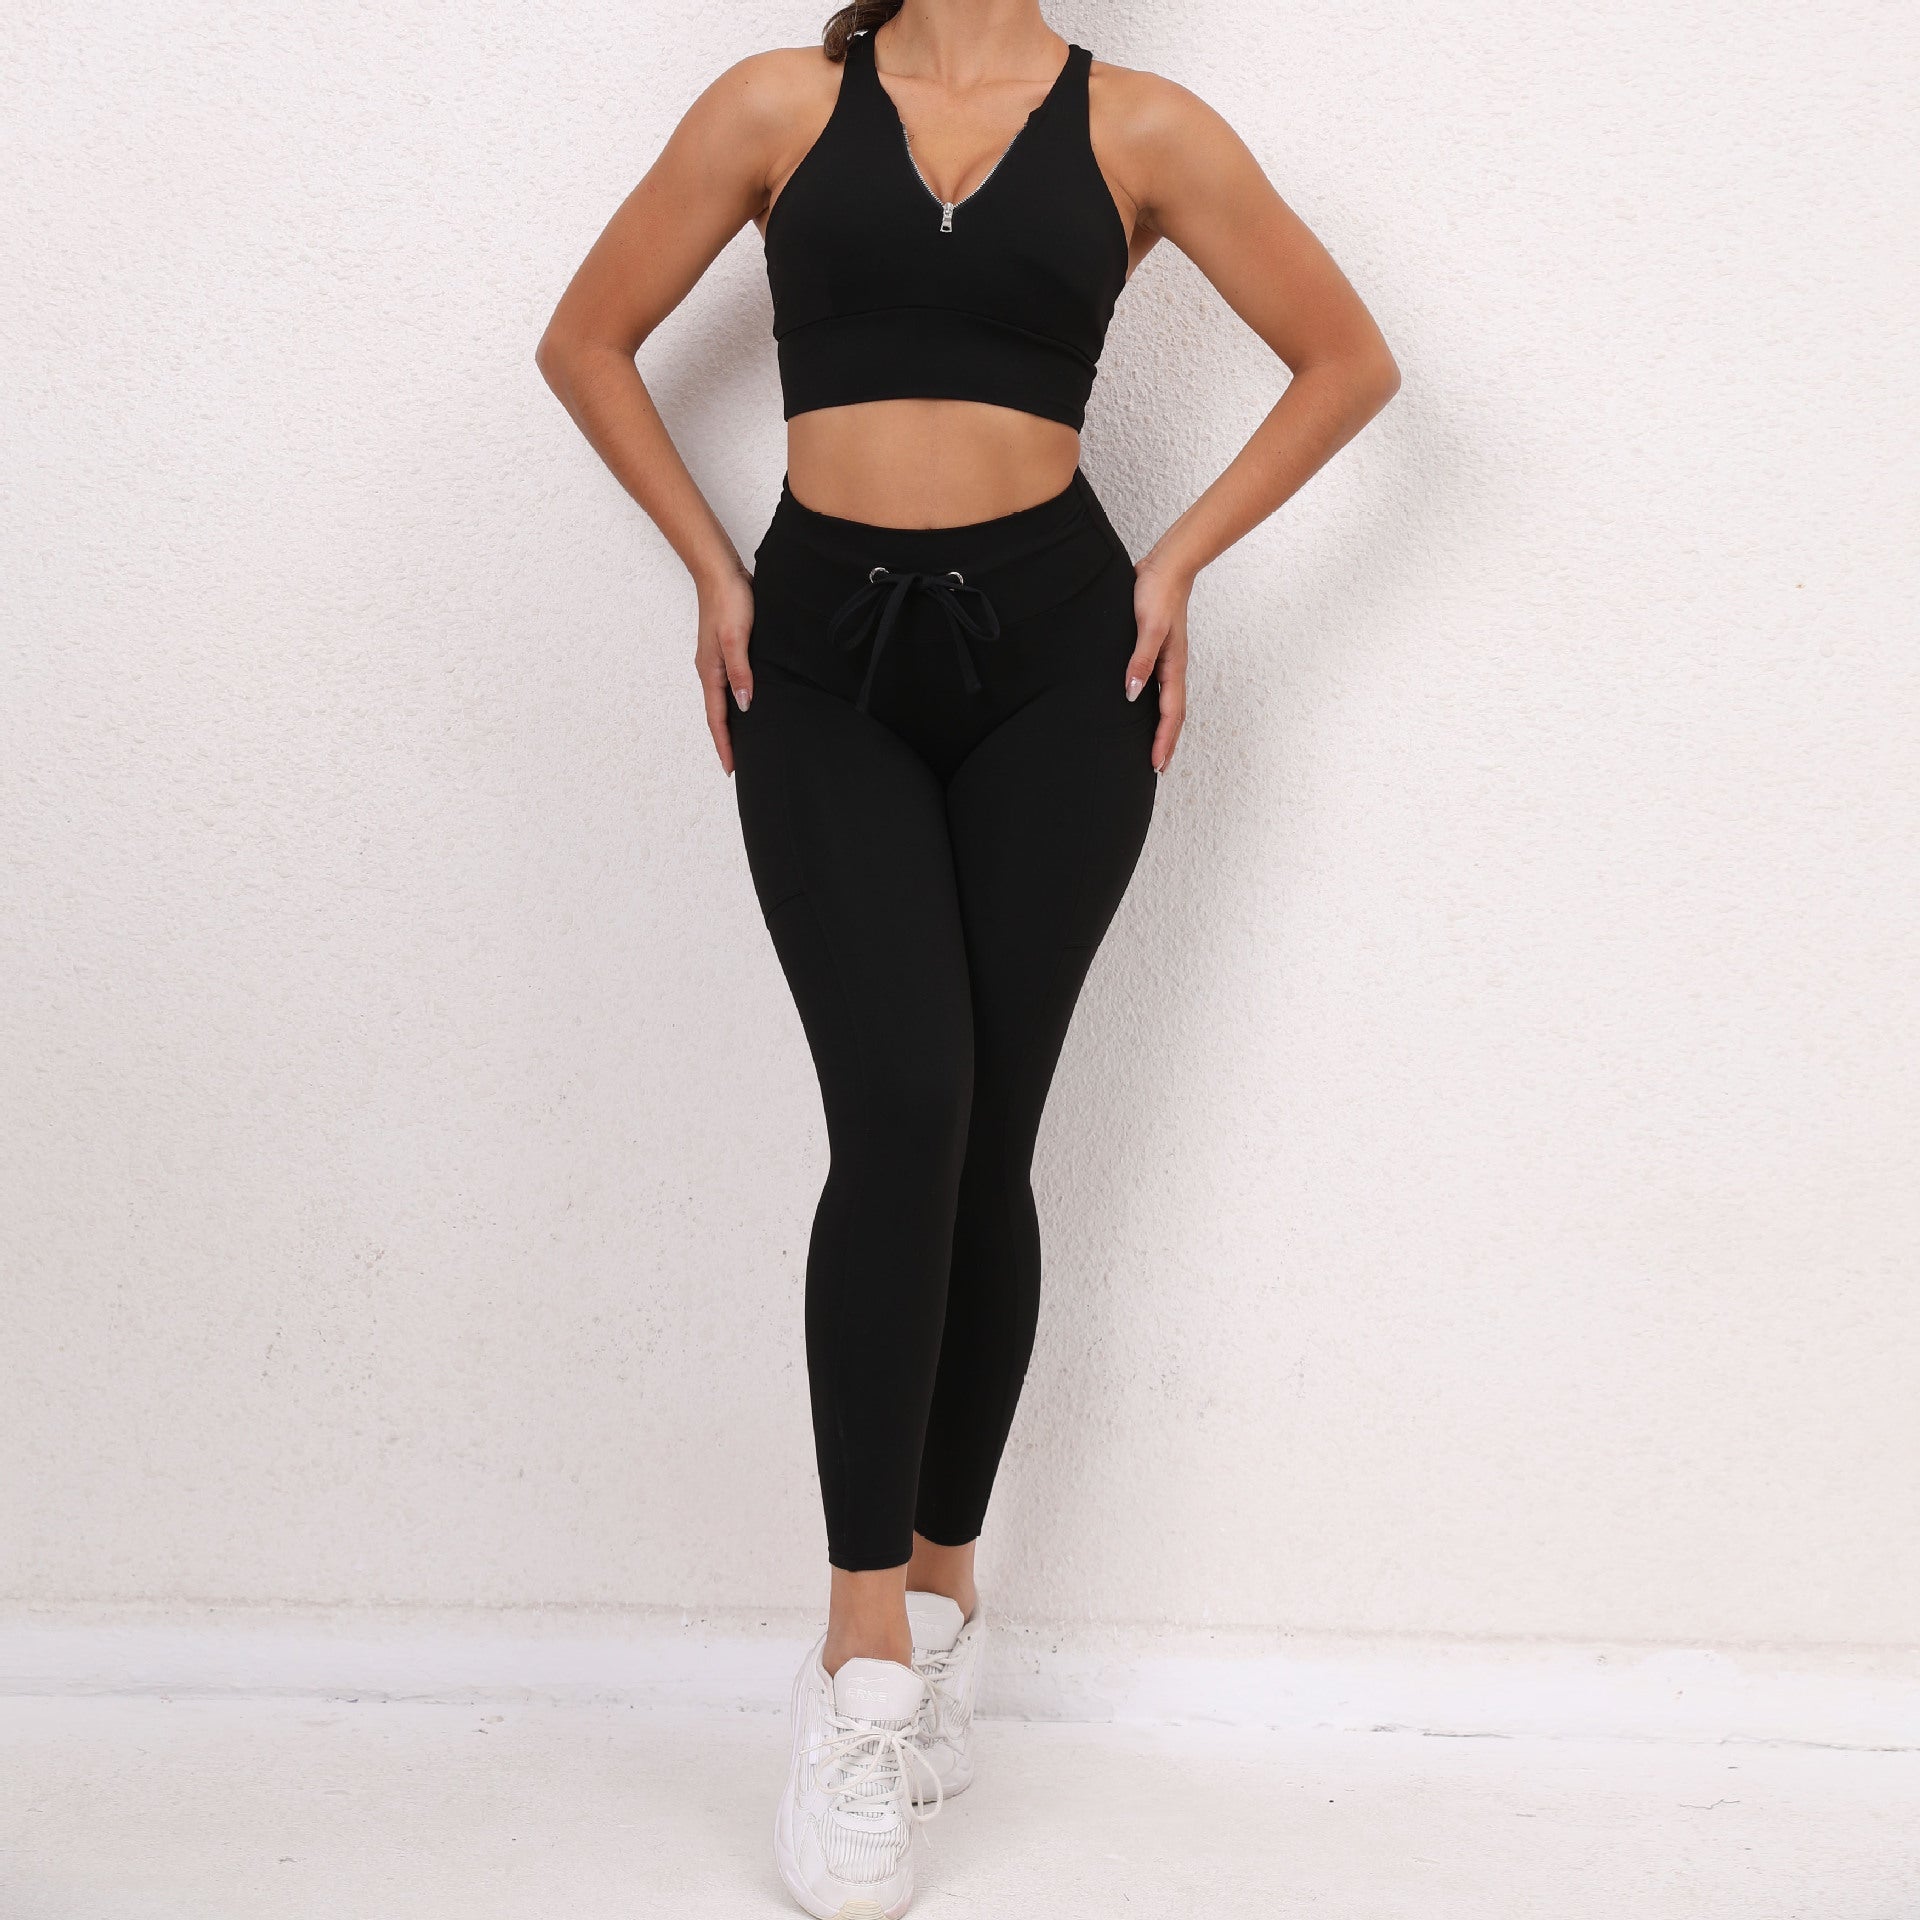 Sexy Drawstring Elastic Sports Yoga Suits for Women-Activewear-Black-S-Free Shipping at meselling99